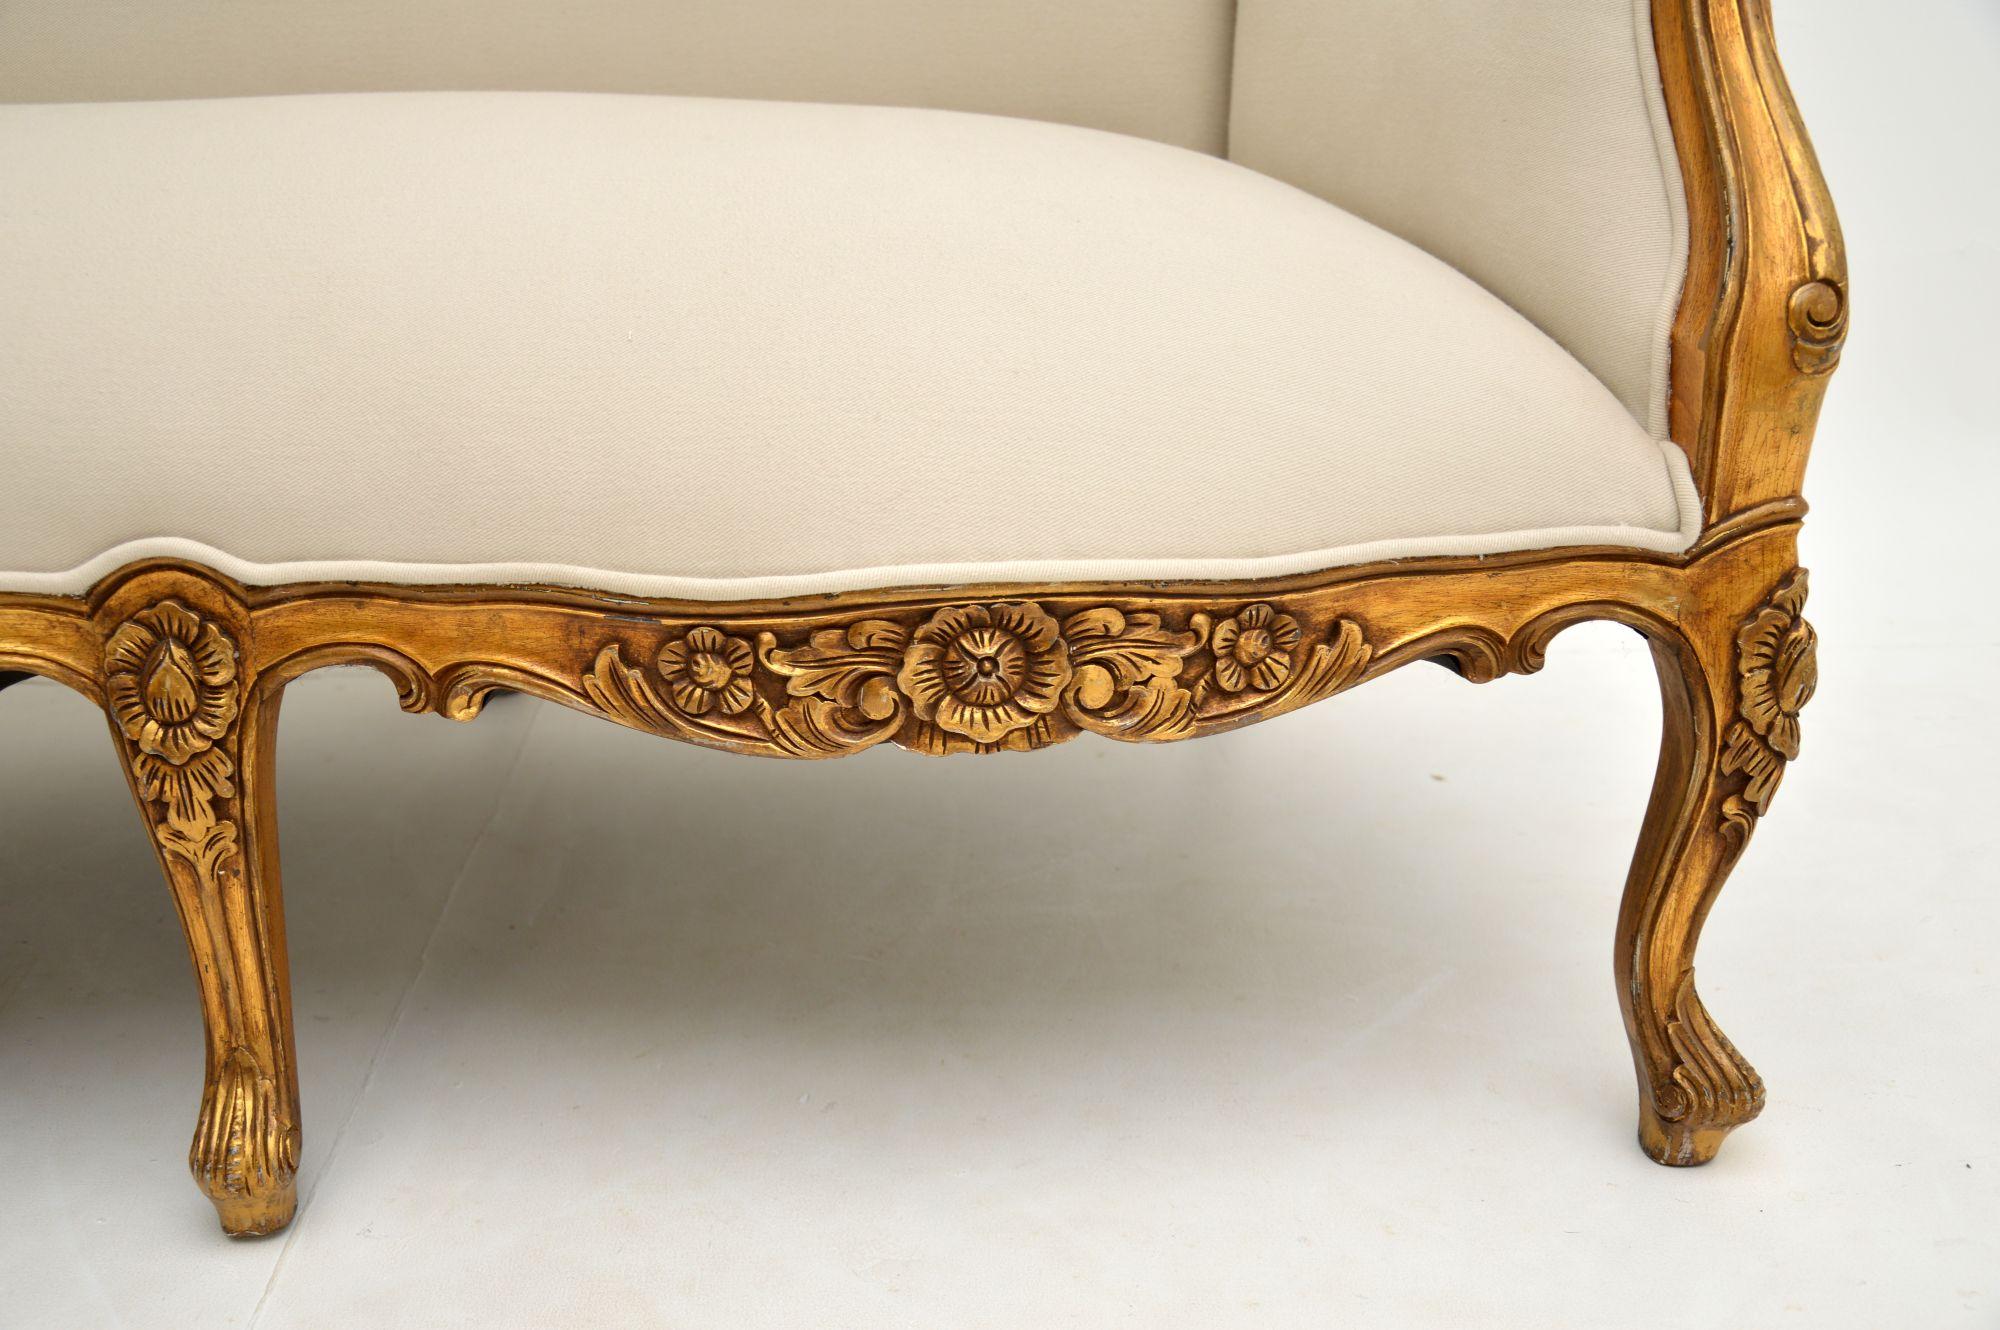 Giltwood Antique Louis Style French Gilt Wood Sofa